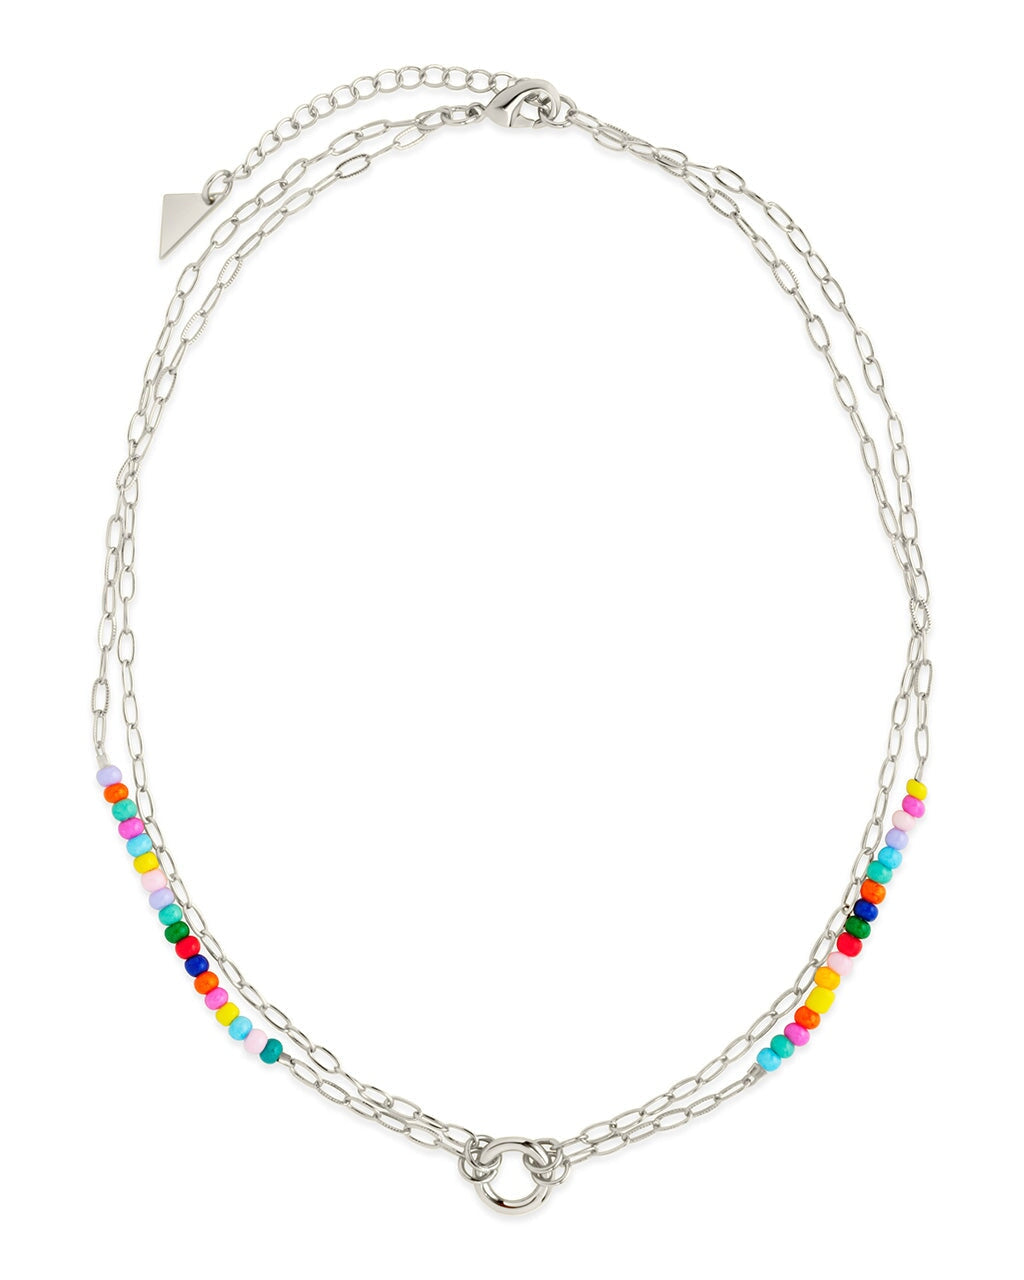 Iridiana Beaded Necklace Necklace Sterling Forever 